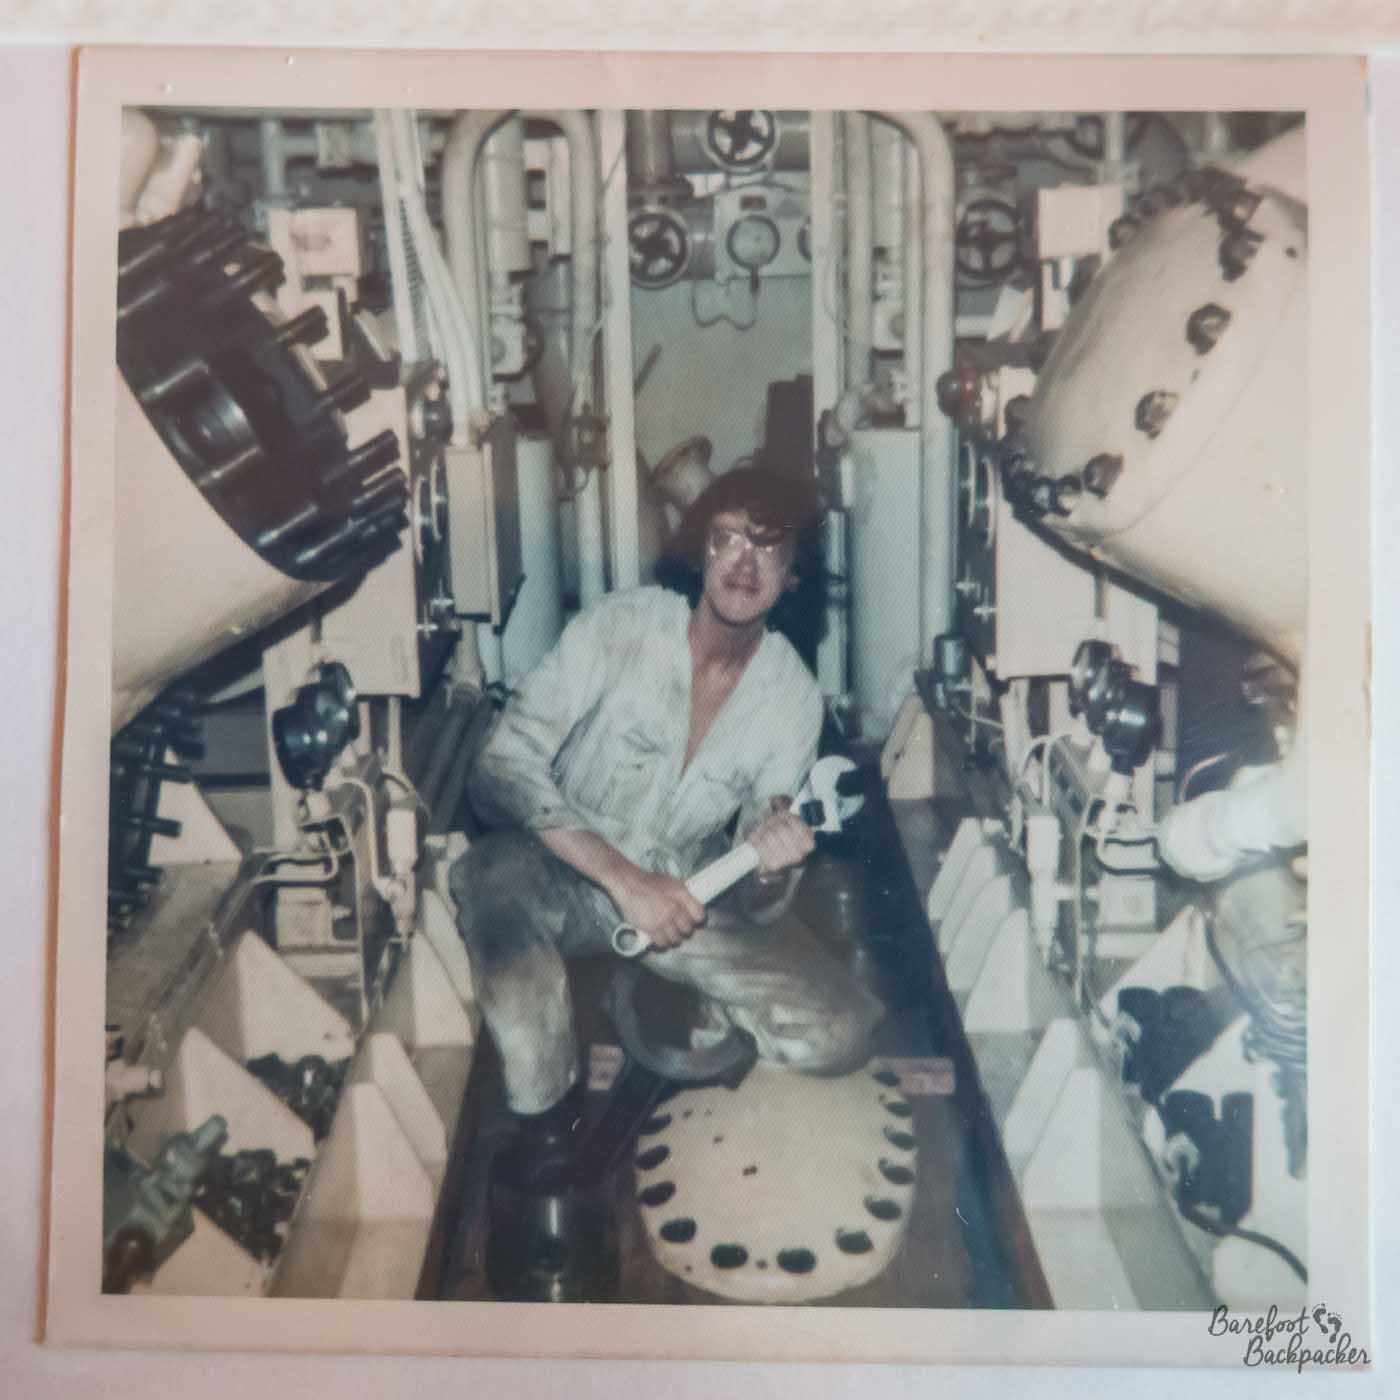 A photo taken of a previously-taken picture, possibly a polaroid, in a faded 1970s way. The older picture is of the inside of an engine room type environment. A man in a dirty boiler suit, boots, and glasses, is crouching down between some large pieces of engineering on either side of him. He is holding a large spanner or wrench.